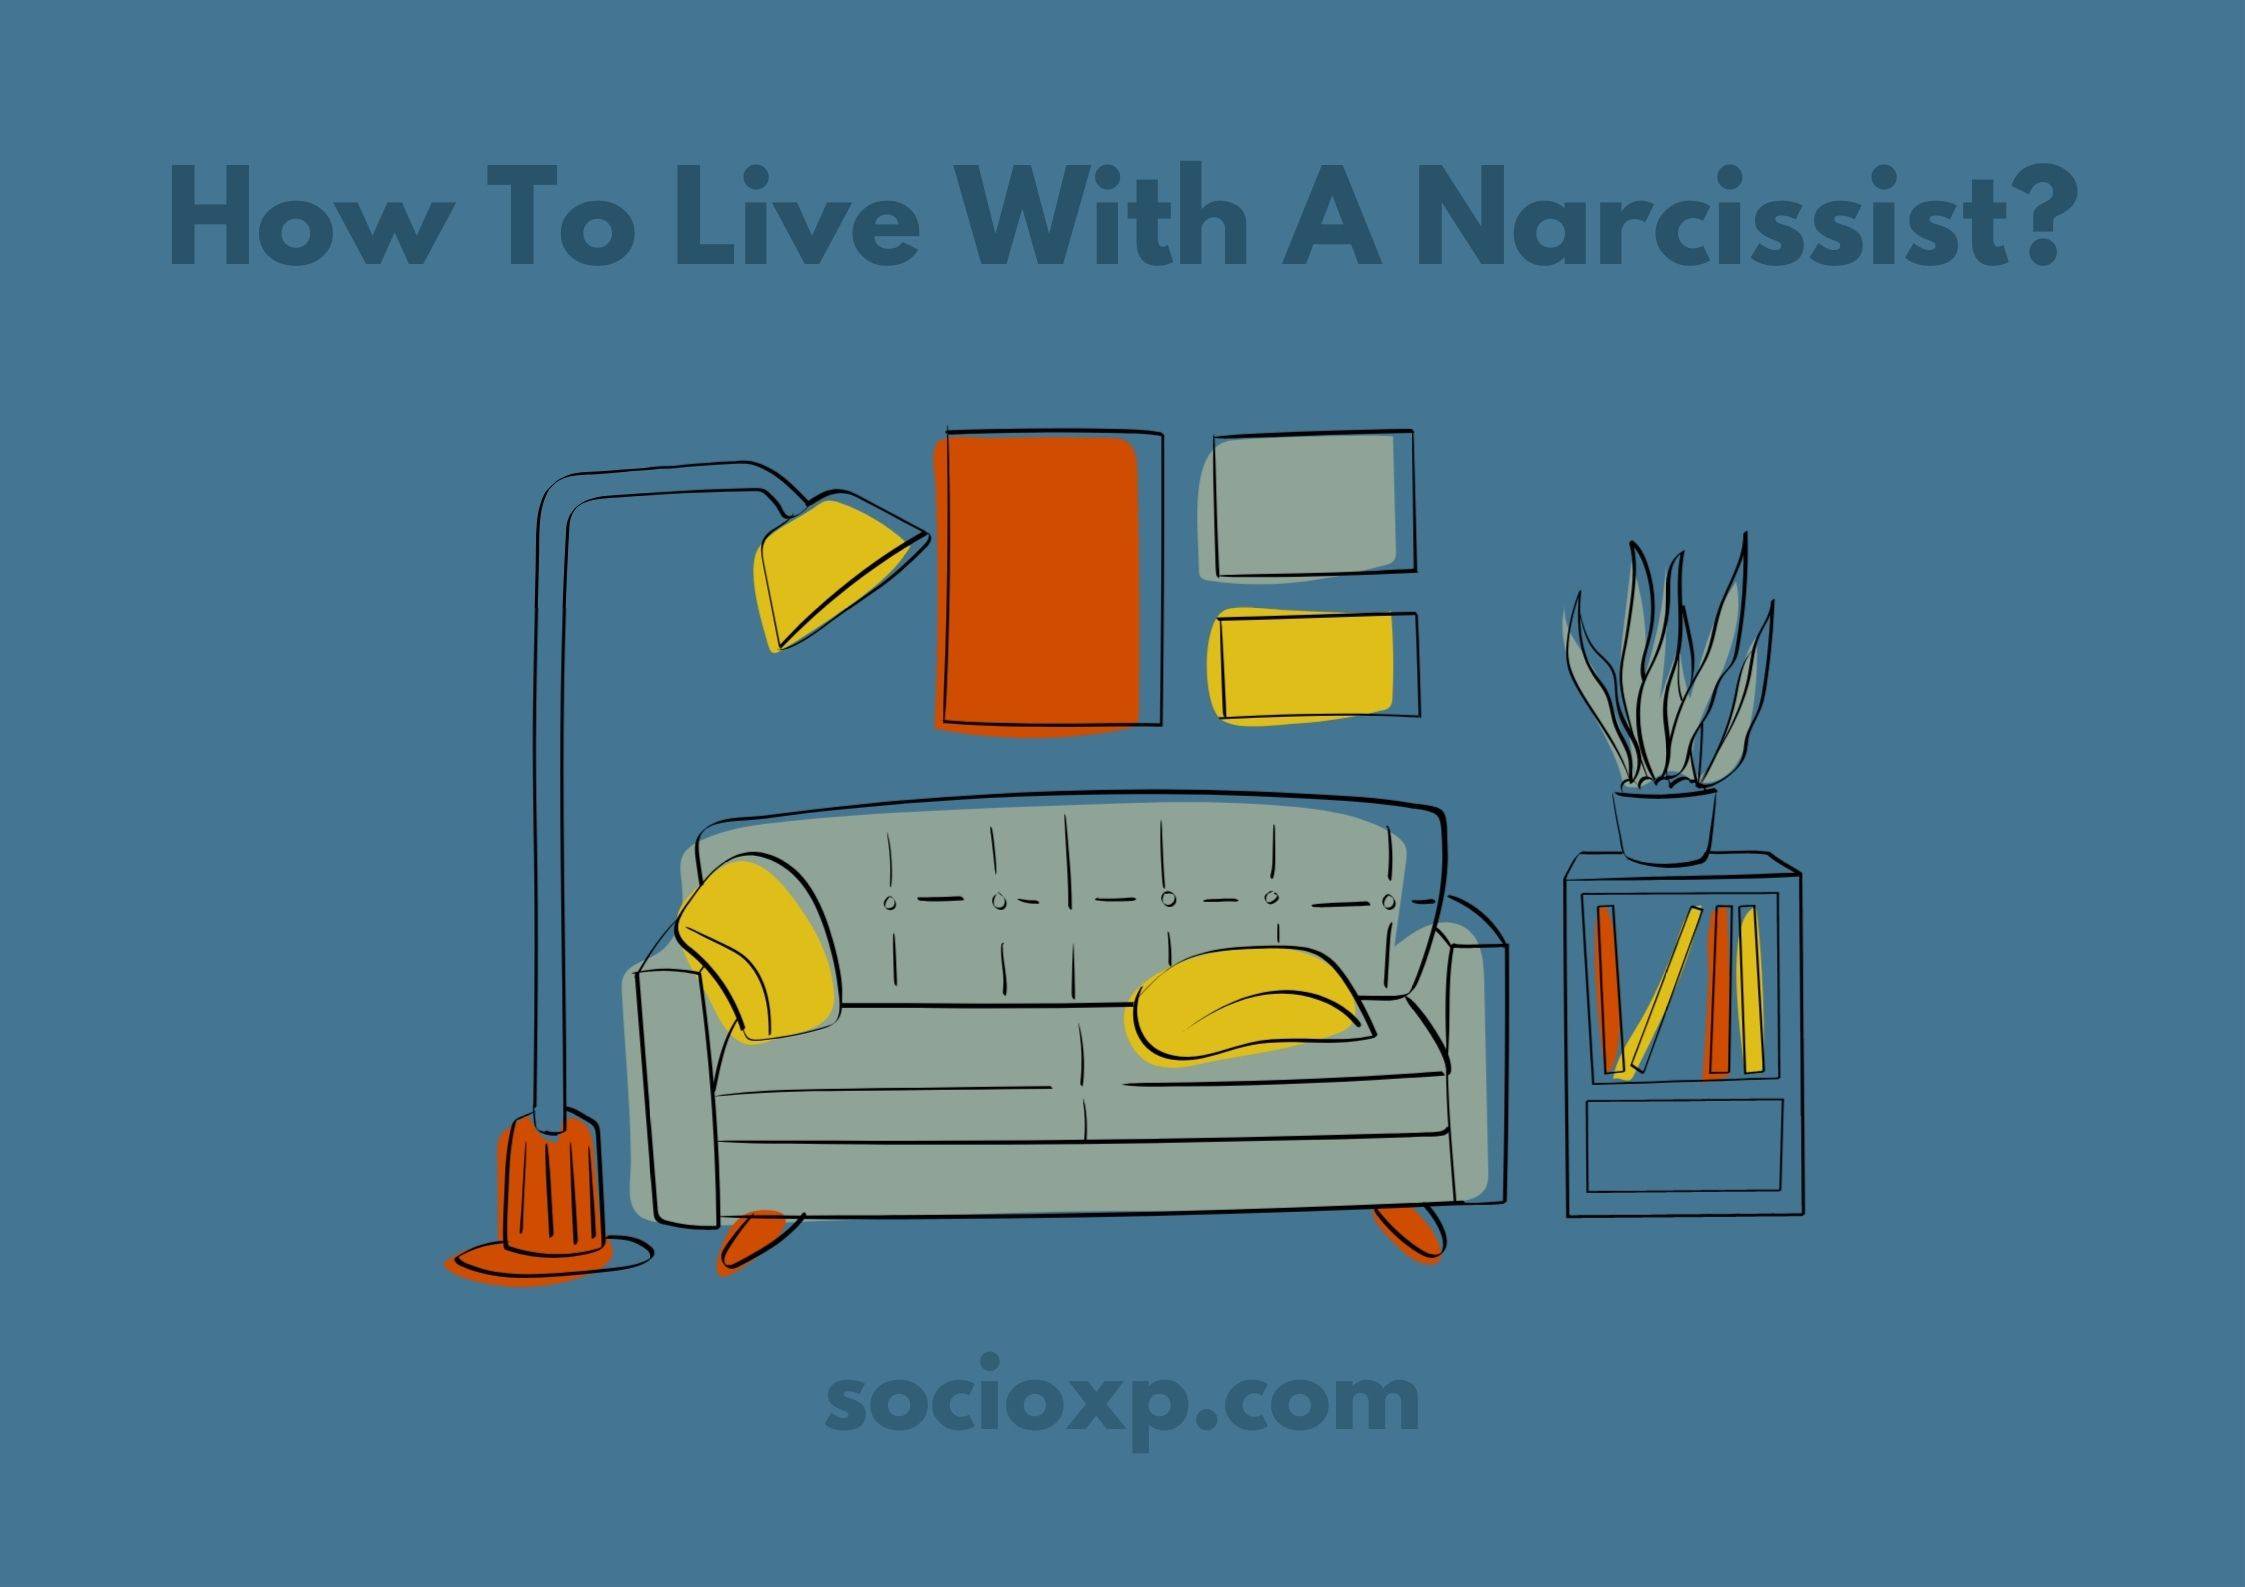 How To Live With A Narcissist?